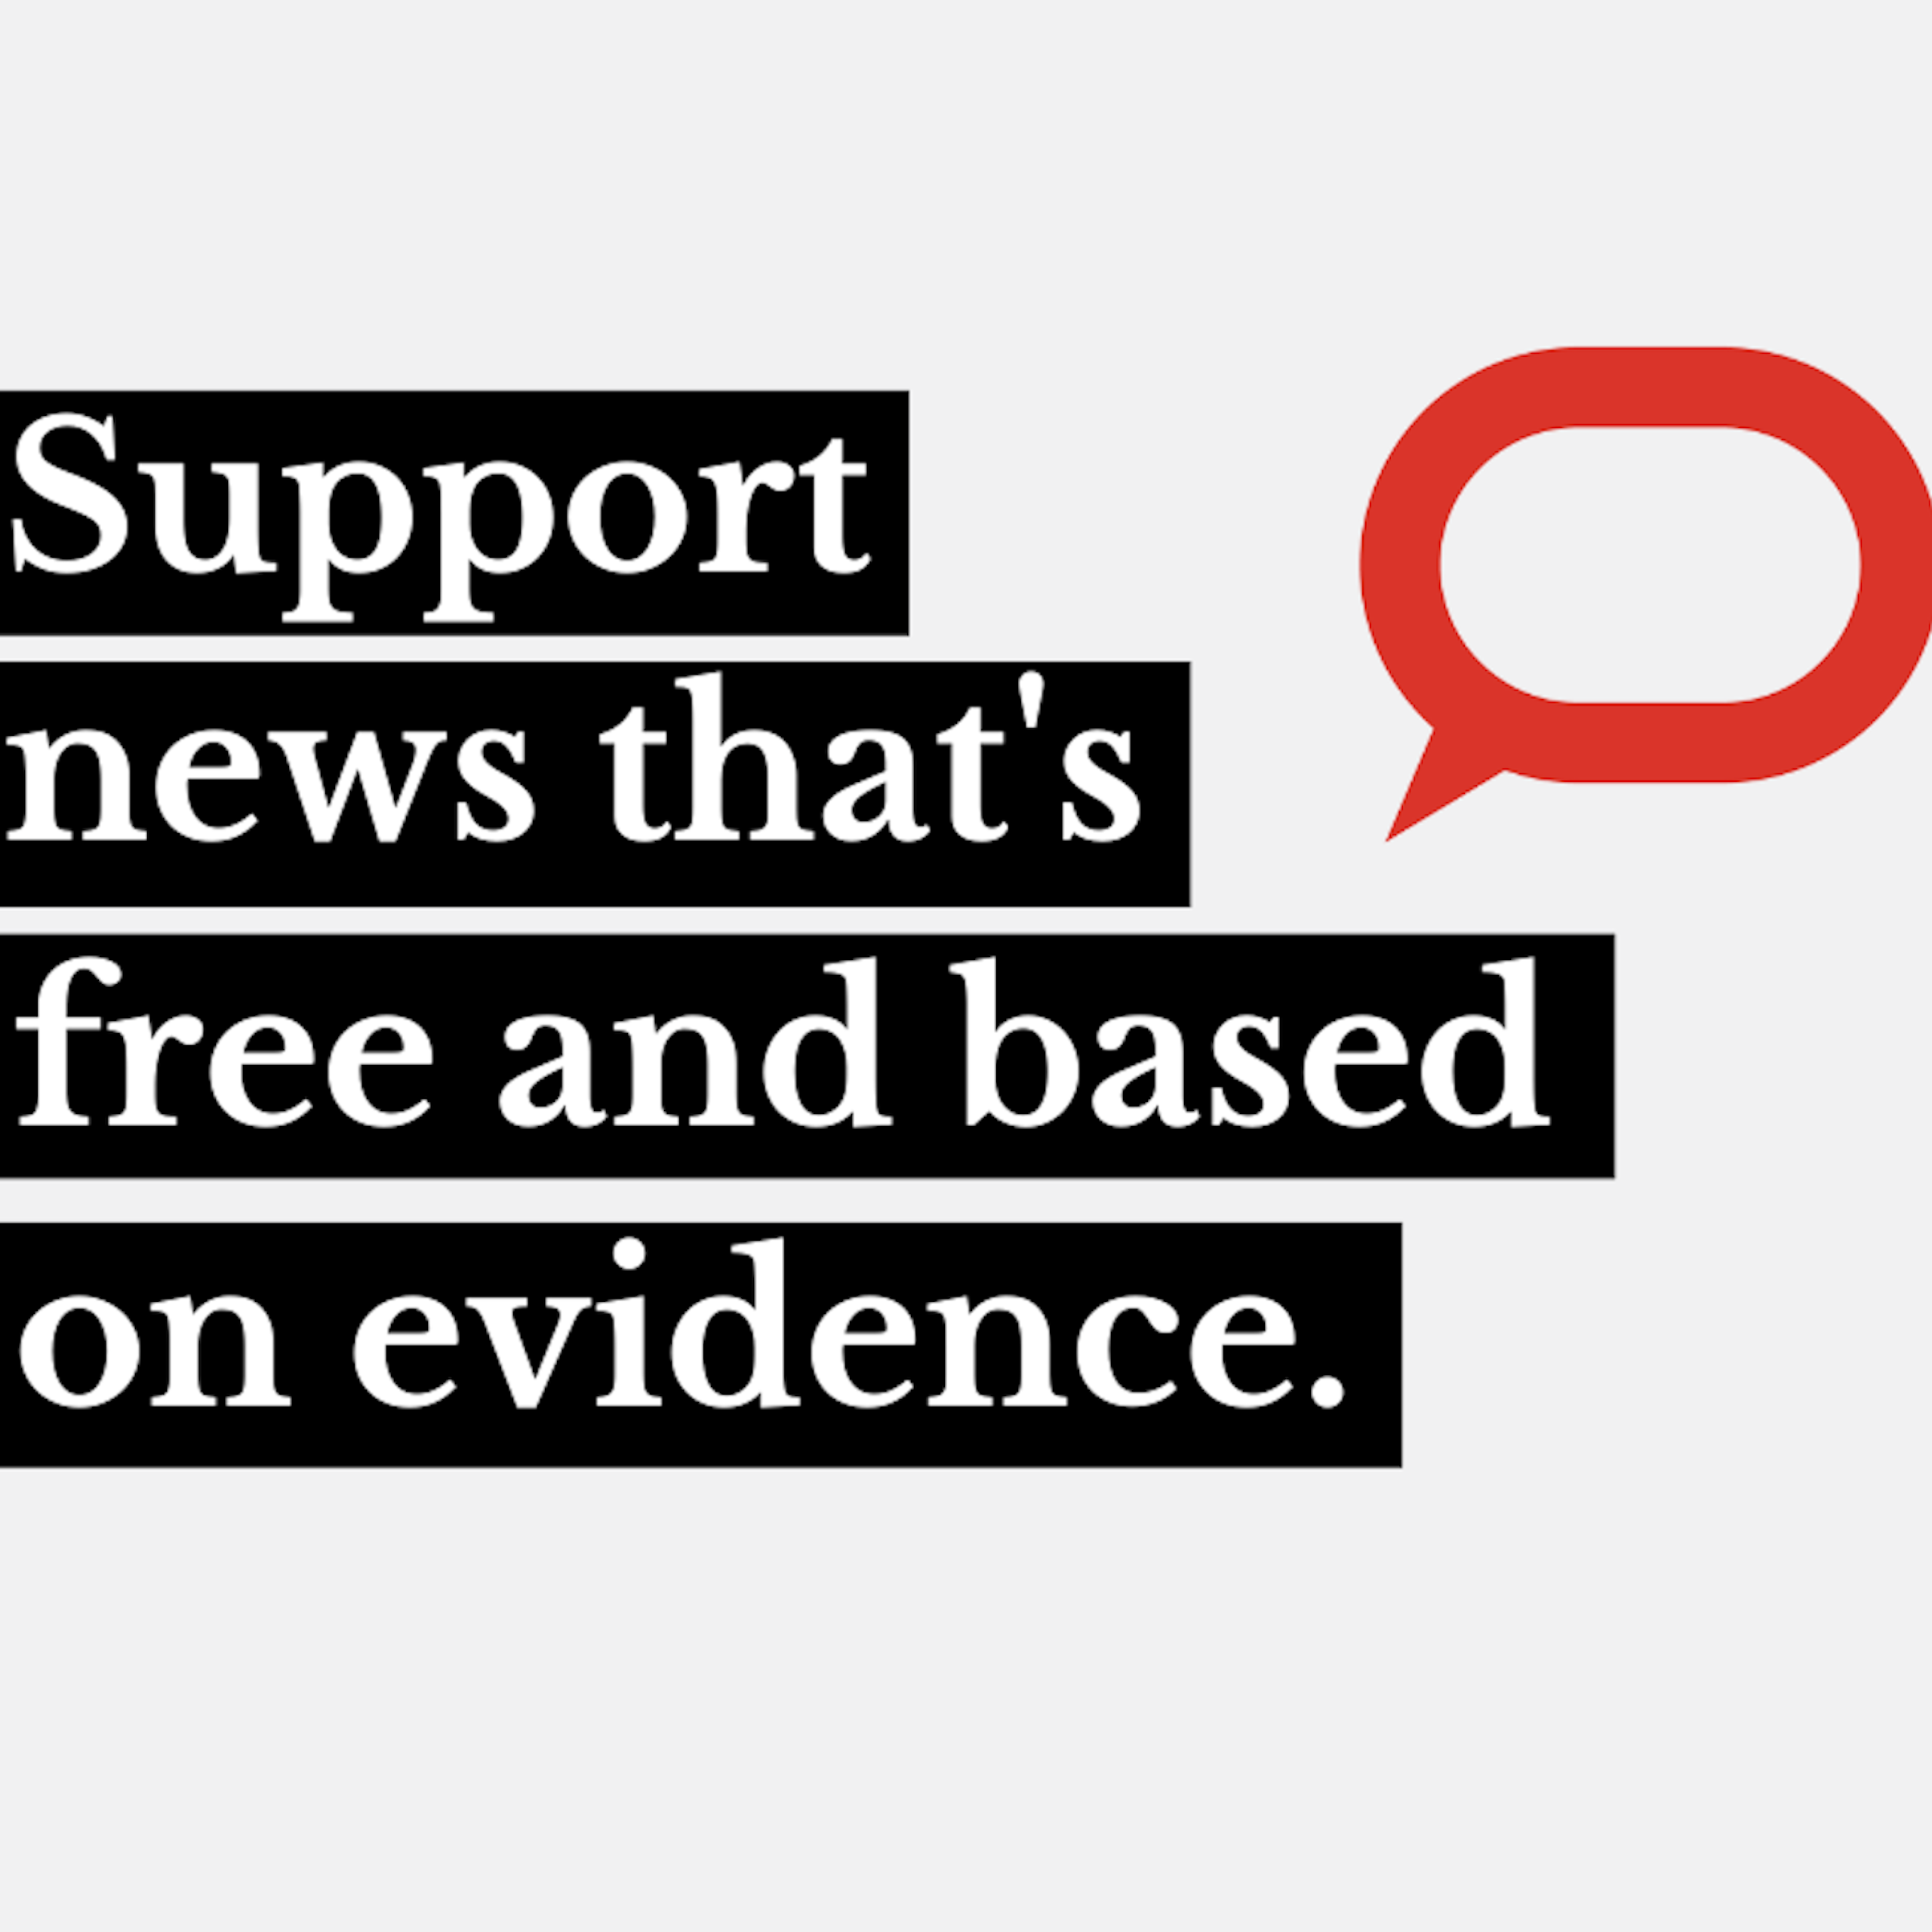 Graphic with the words "Support news that's free and based on evidence."